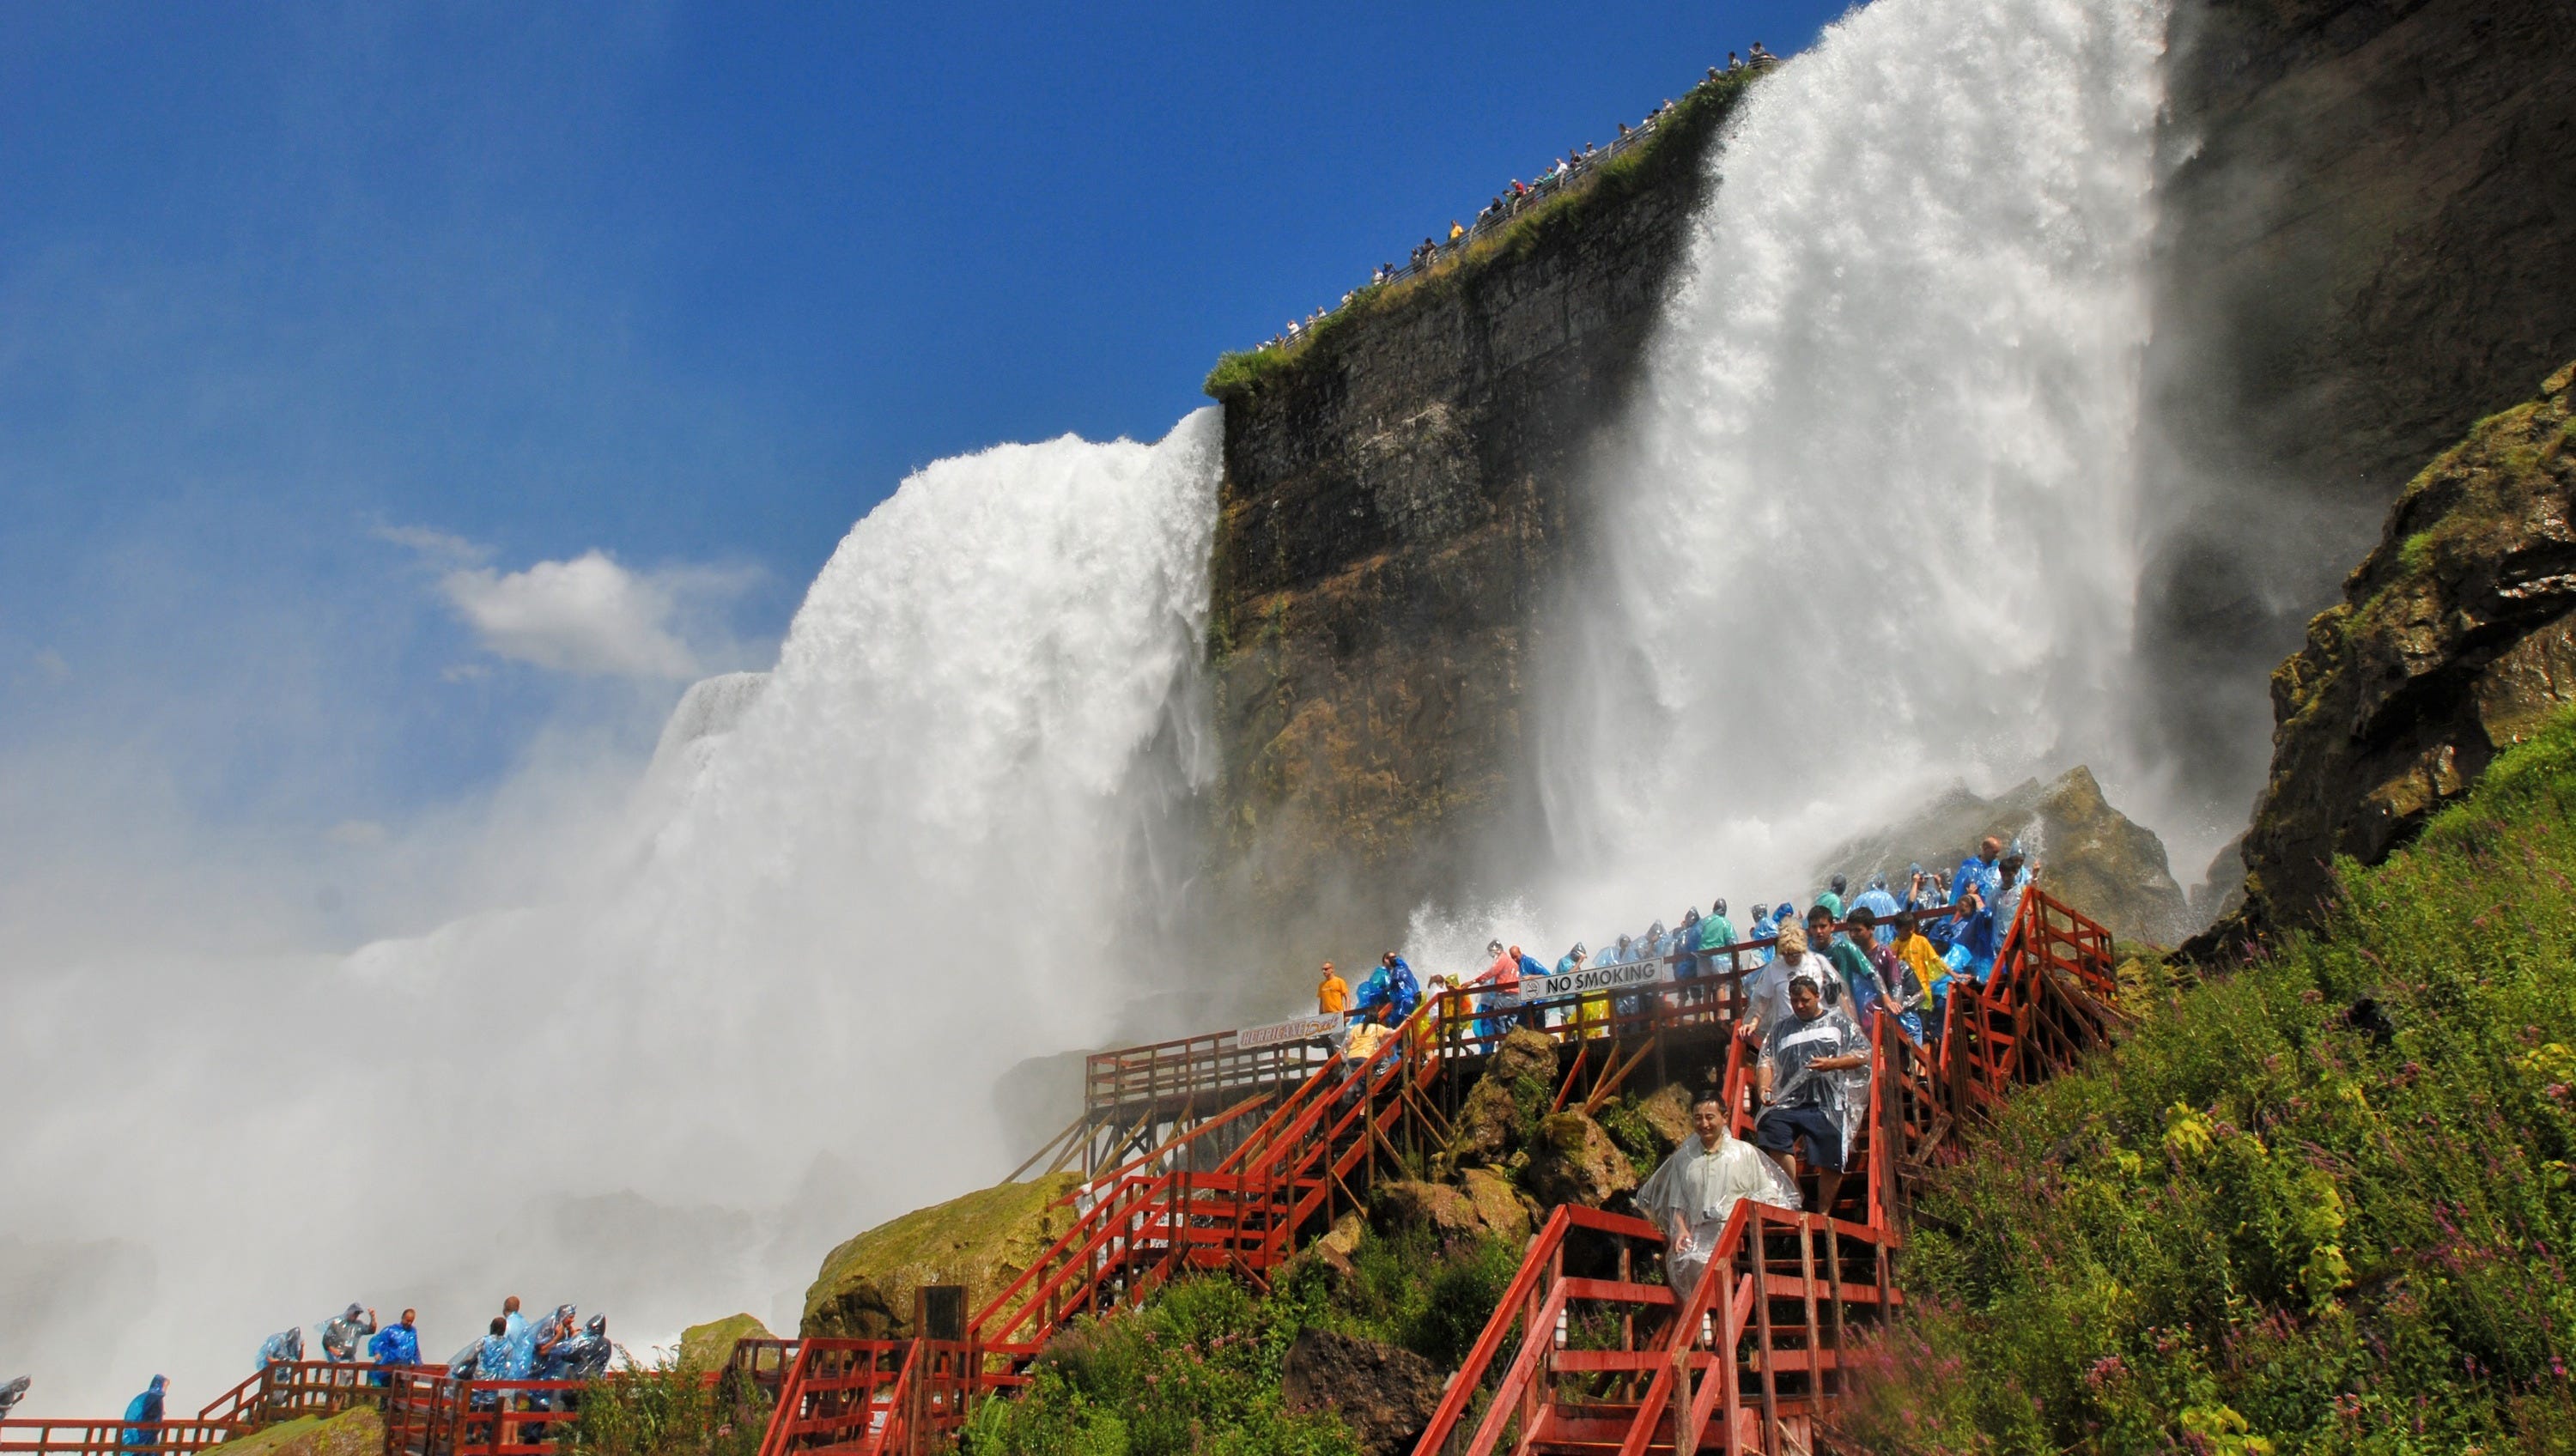 America's iconic attractions: Best natural wonders